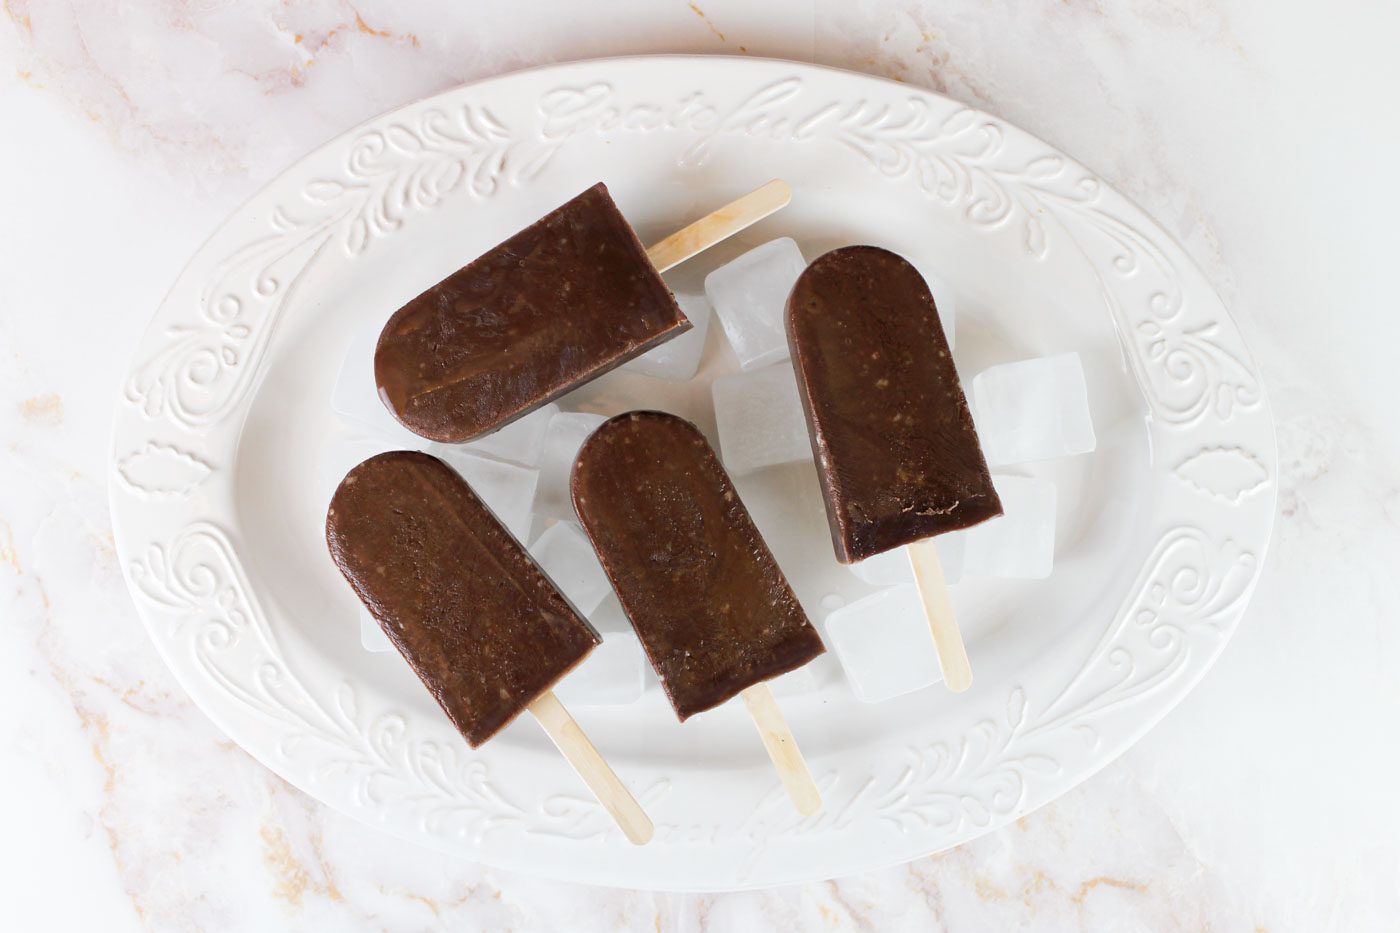 4 chocolate kefir popsicles sit on a large white platter